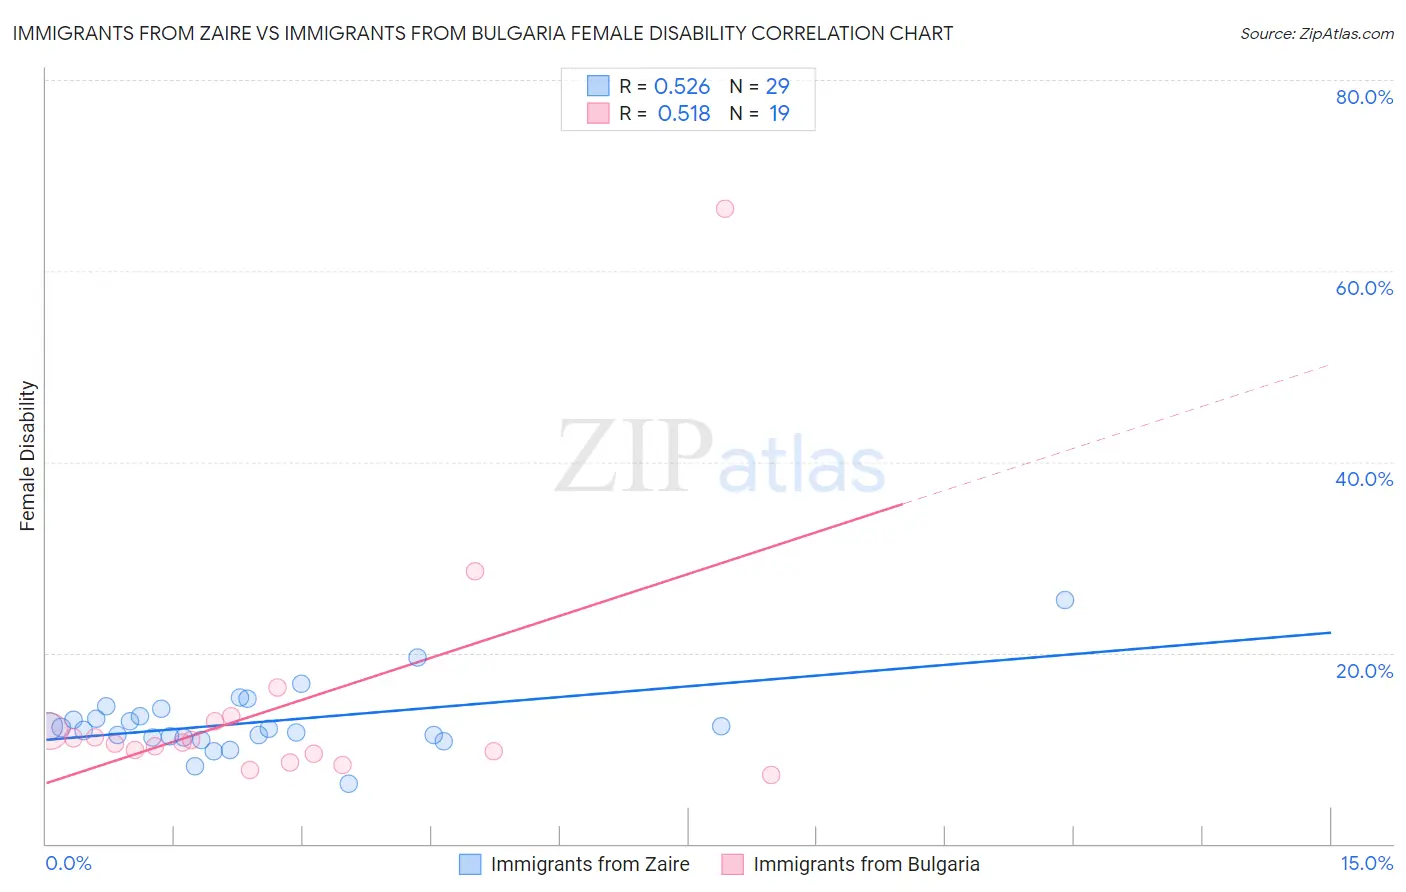 Immigrants from Zaire vs Immigrants from Bulgaria Female Disability